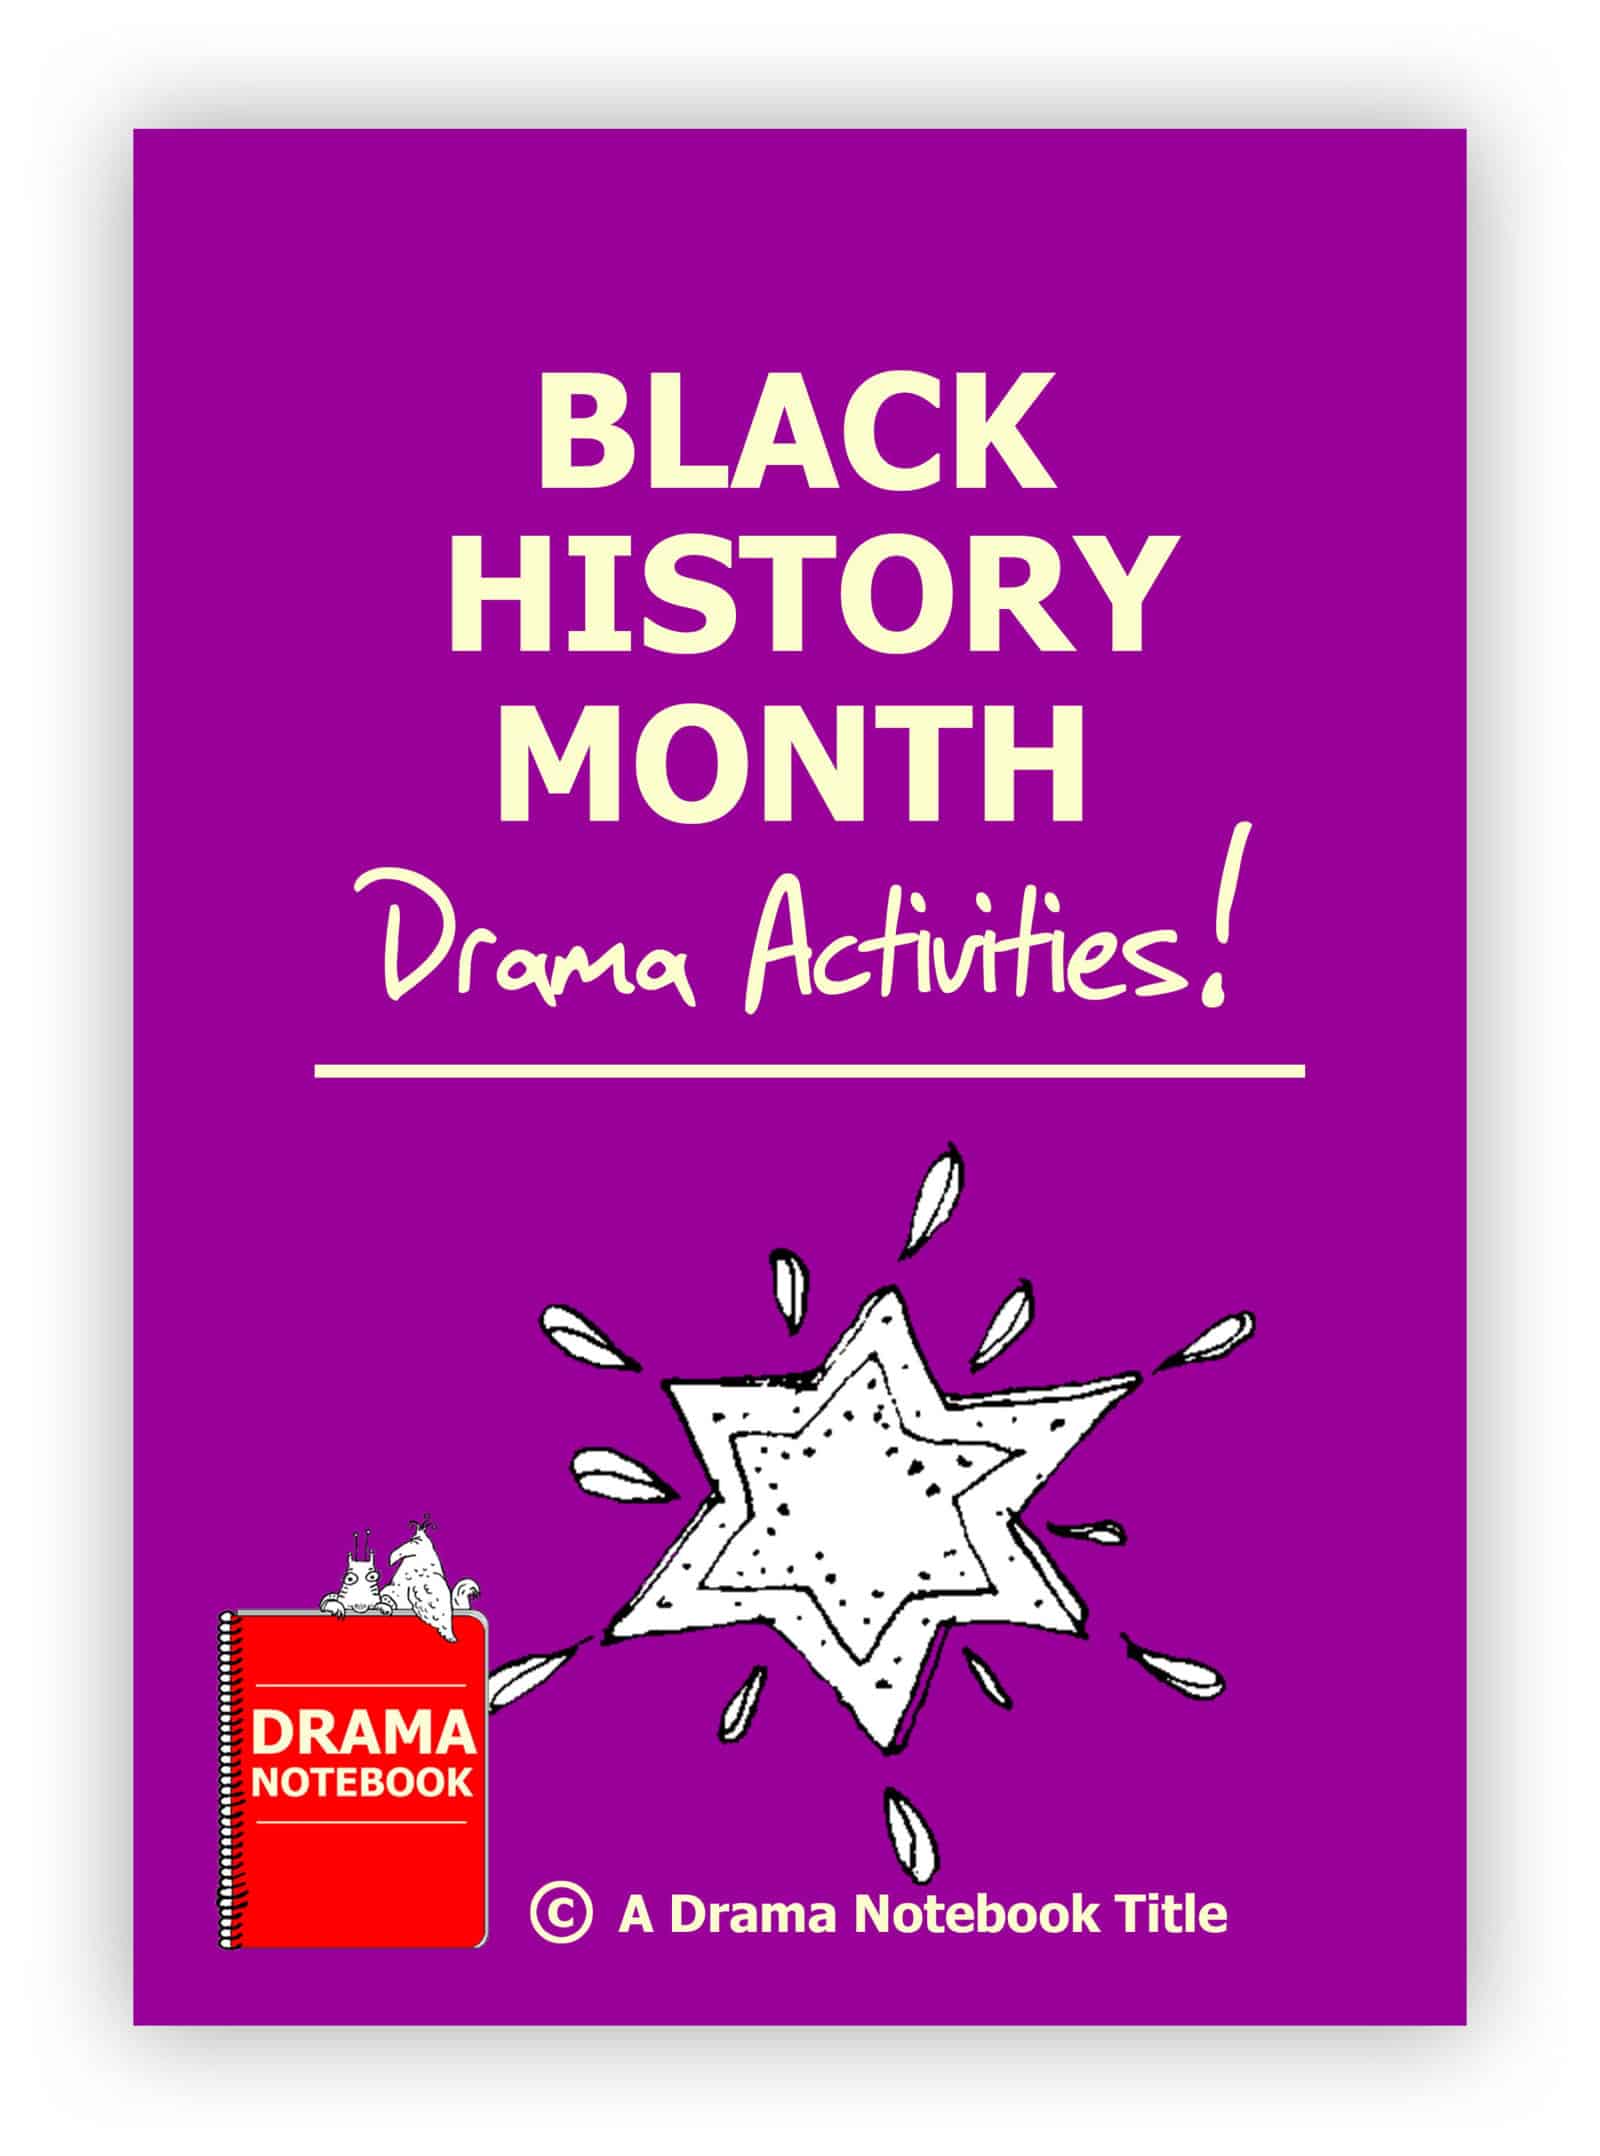 Black History Month drama activities for elementary, middle, and high school students